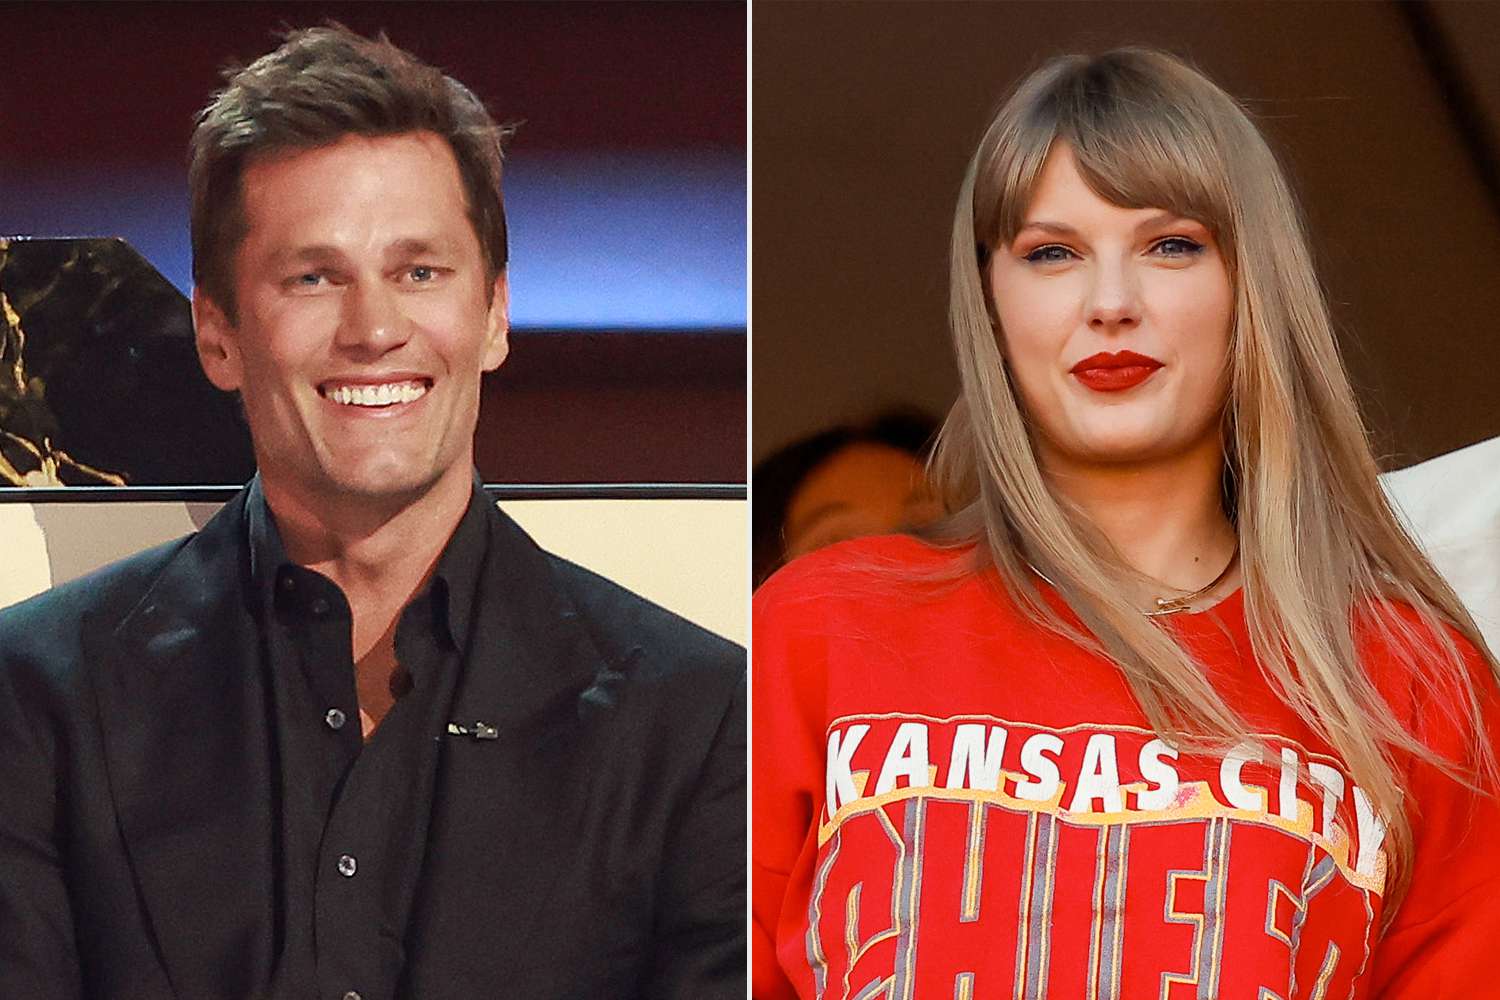 Tom Brady Mocks Taylor Swift and the Chiefs During His Netflix Roast for Having '14-Year-Old Girl' Fans